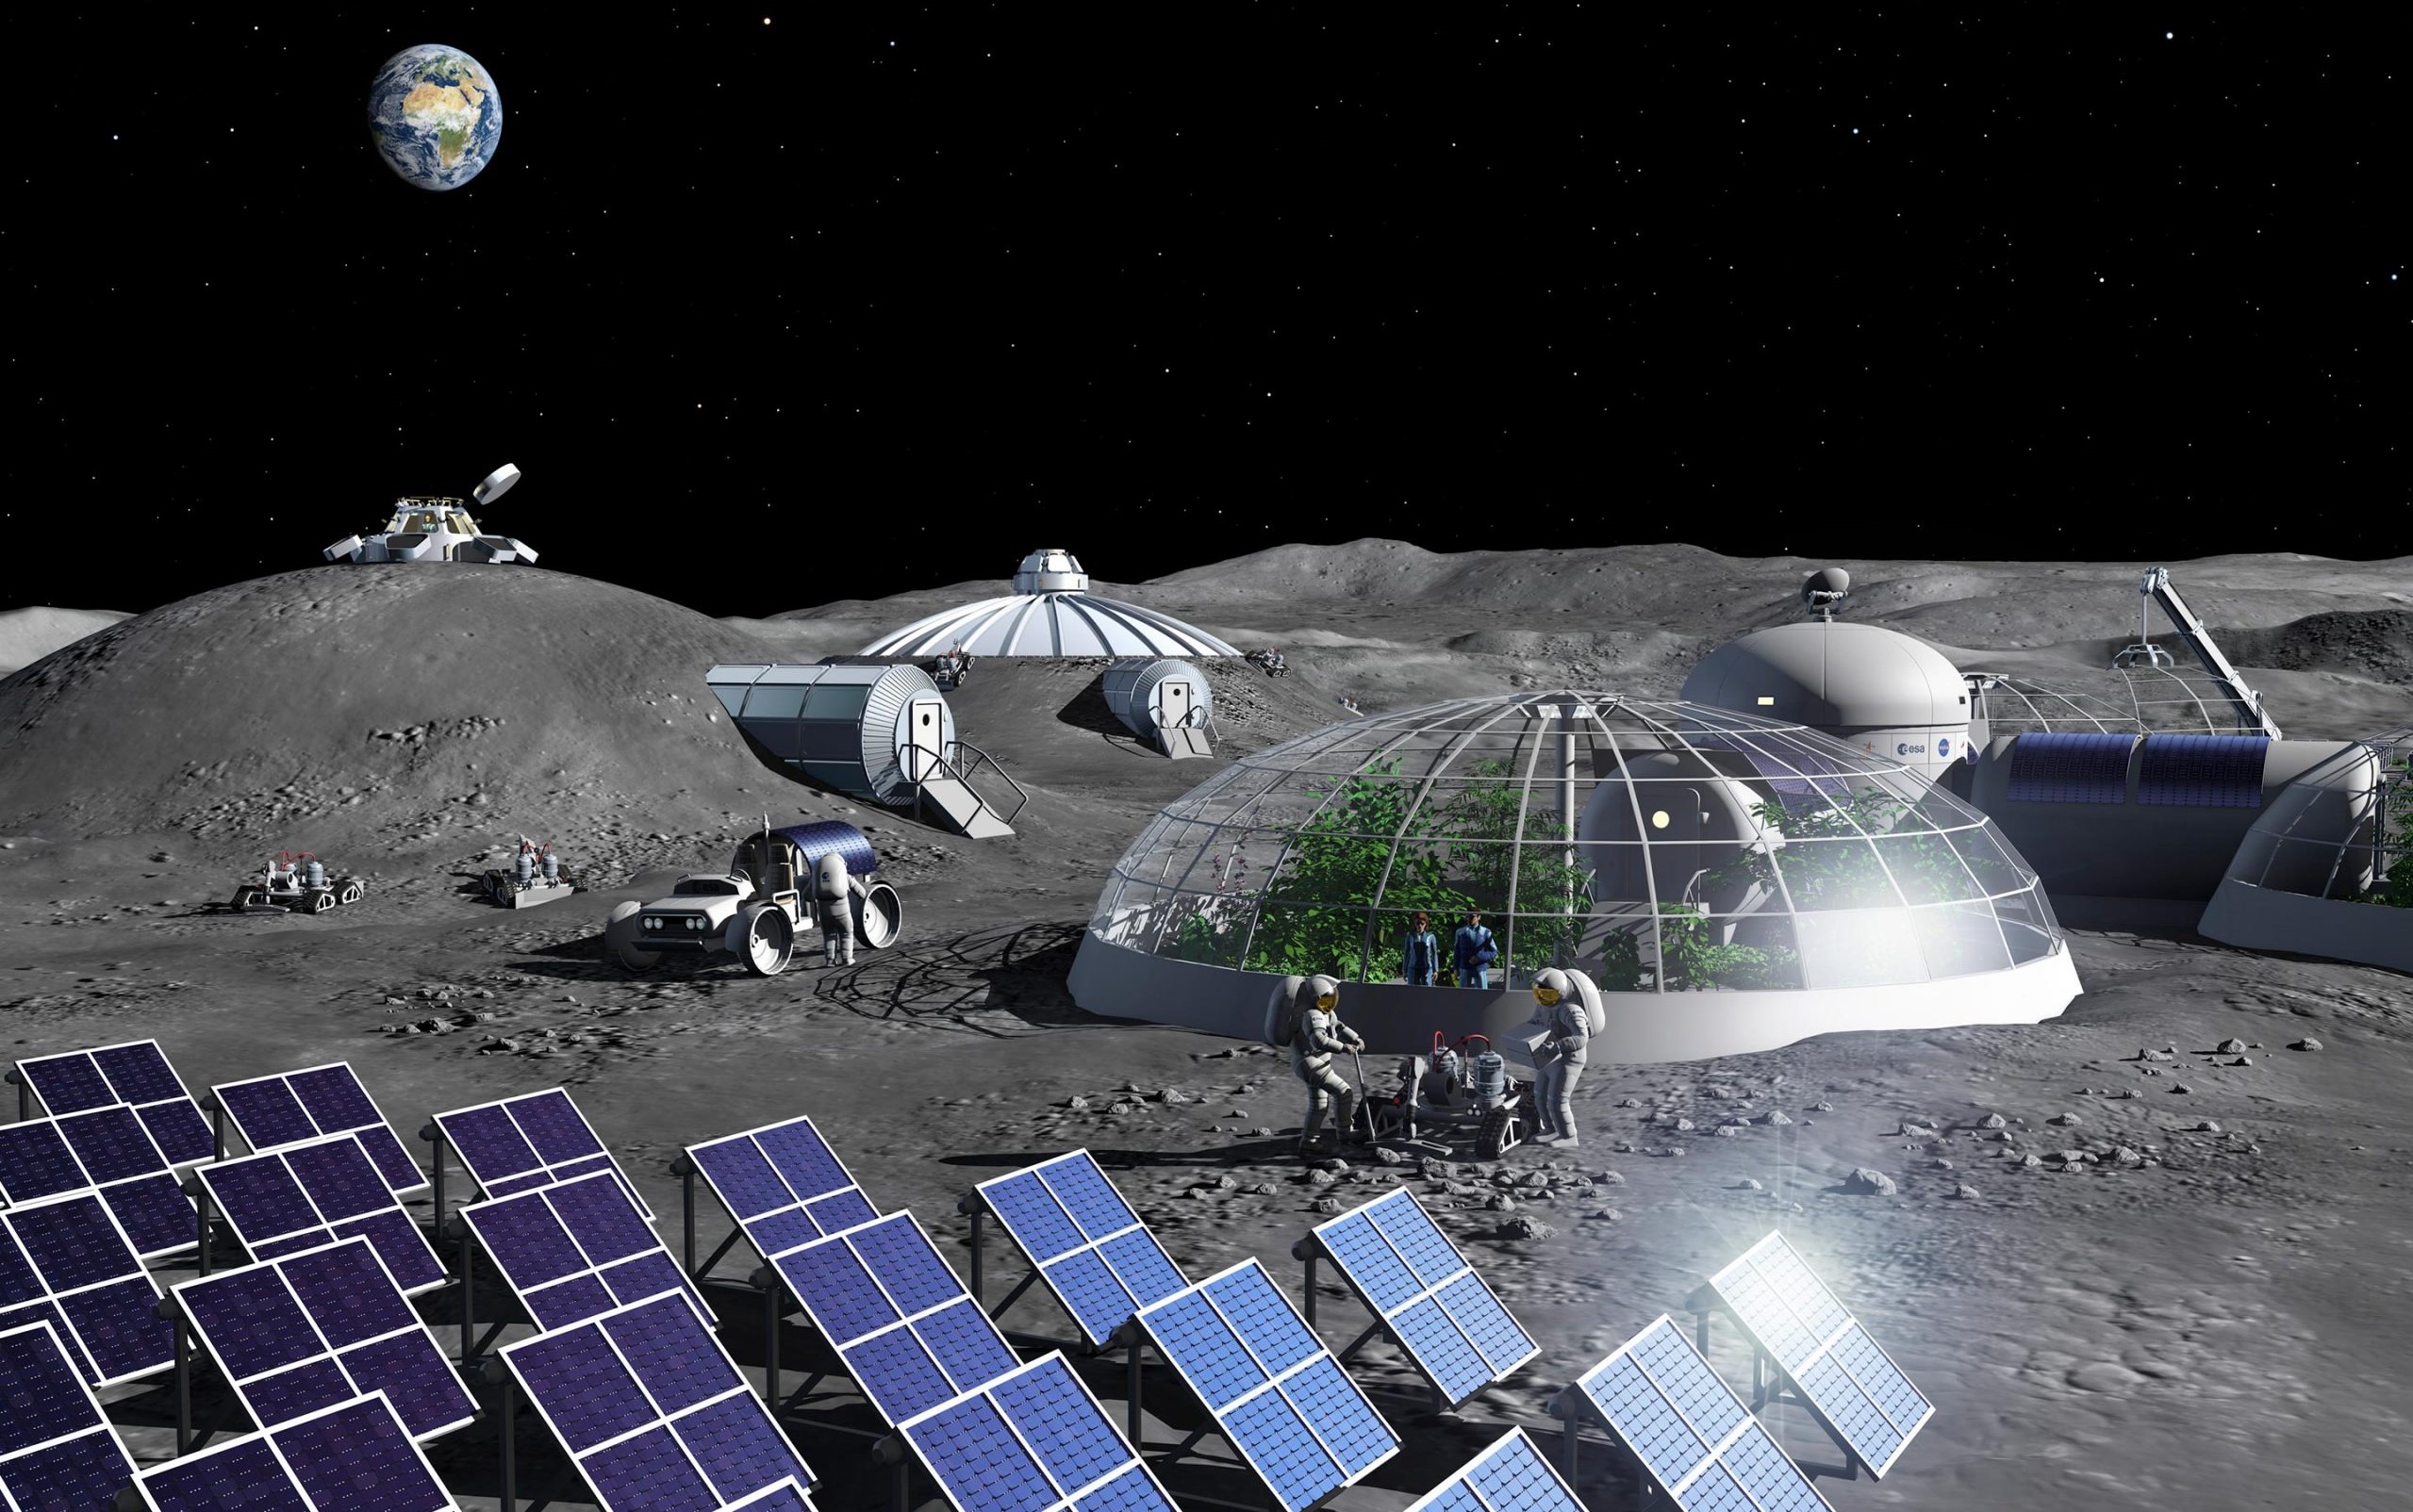 Artist's impression of a base on the moon. Scientists claim that there is enough oxygen on the surface of the Moon for the entire human race for 100,000 years. Credit: ESA / P. Carril